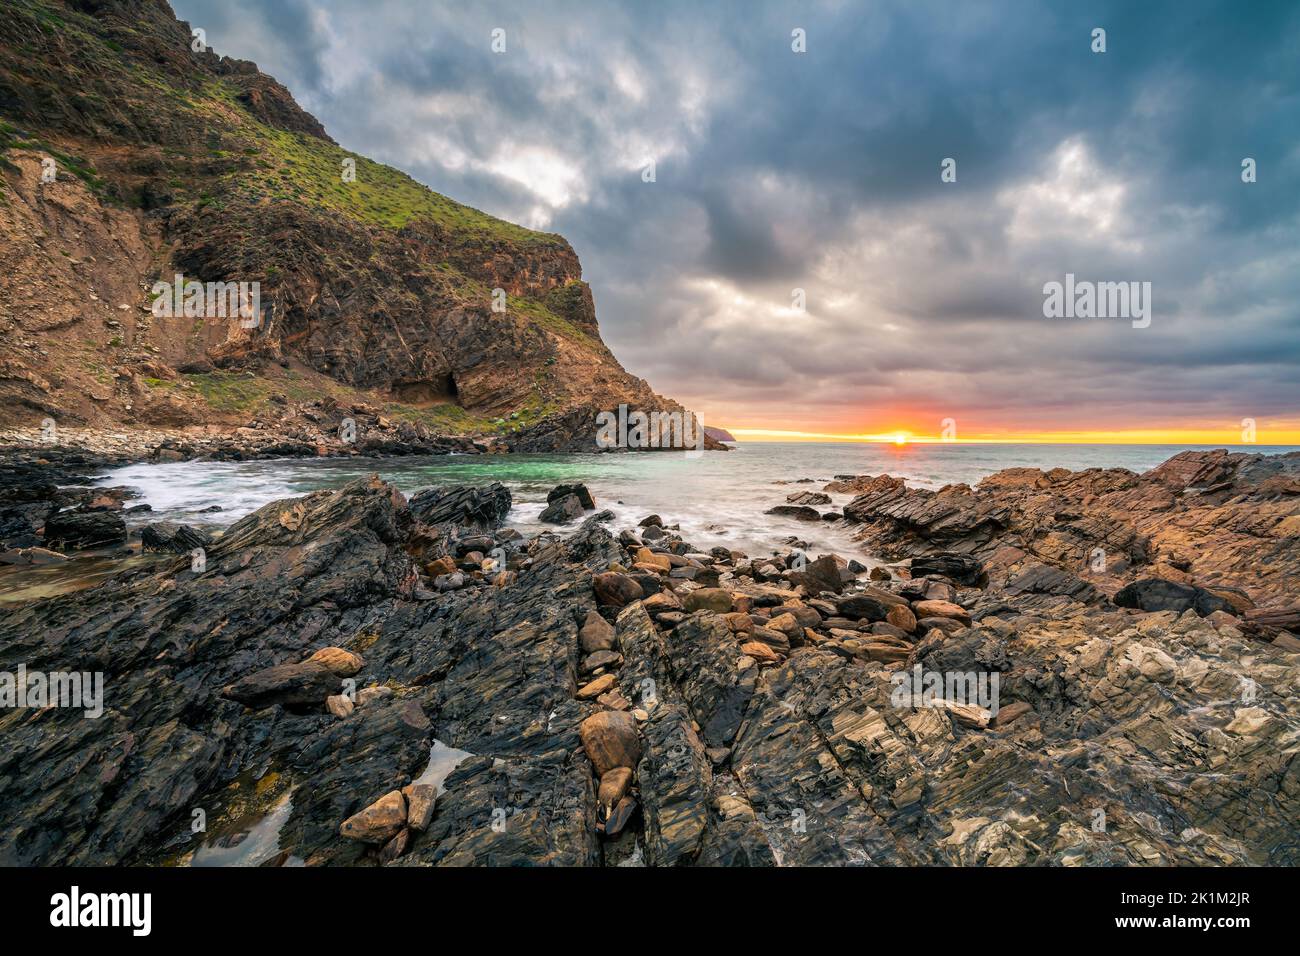 Second Valley rugged coastline at sunset, South Australia Stock Photo